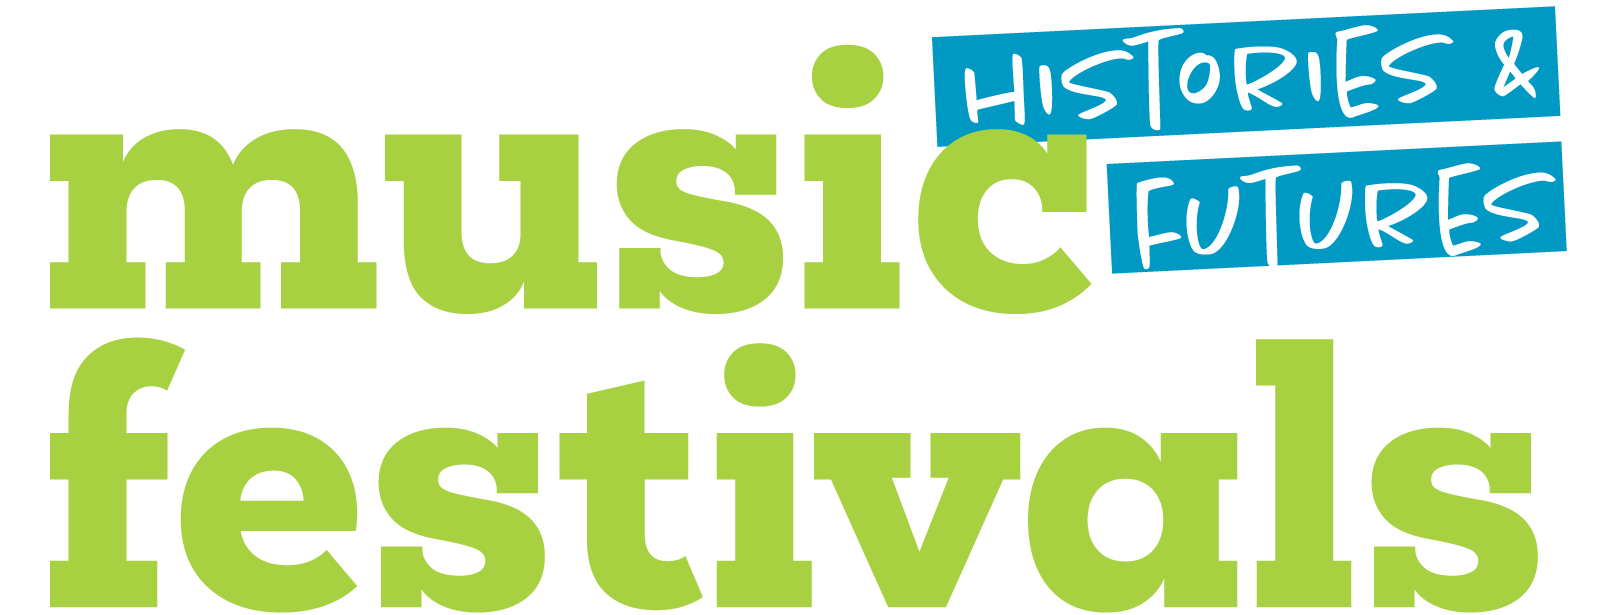 Music Festivals Histories and Futures 2022 Conference Logo